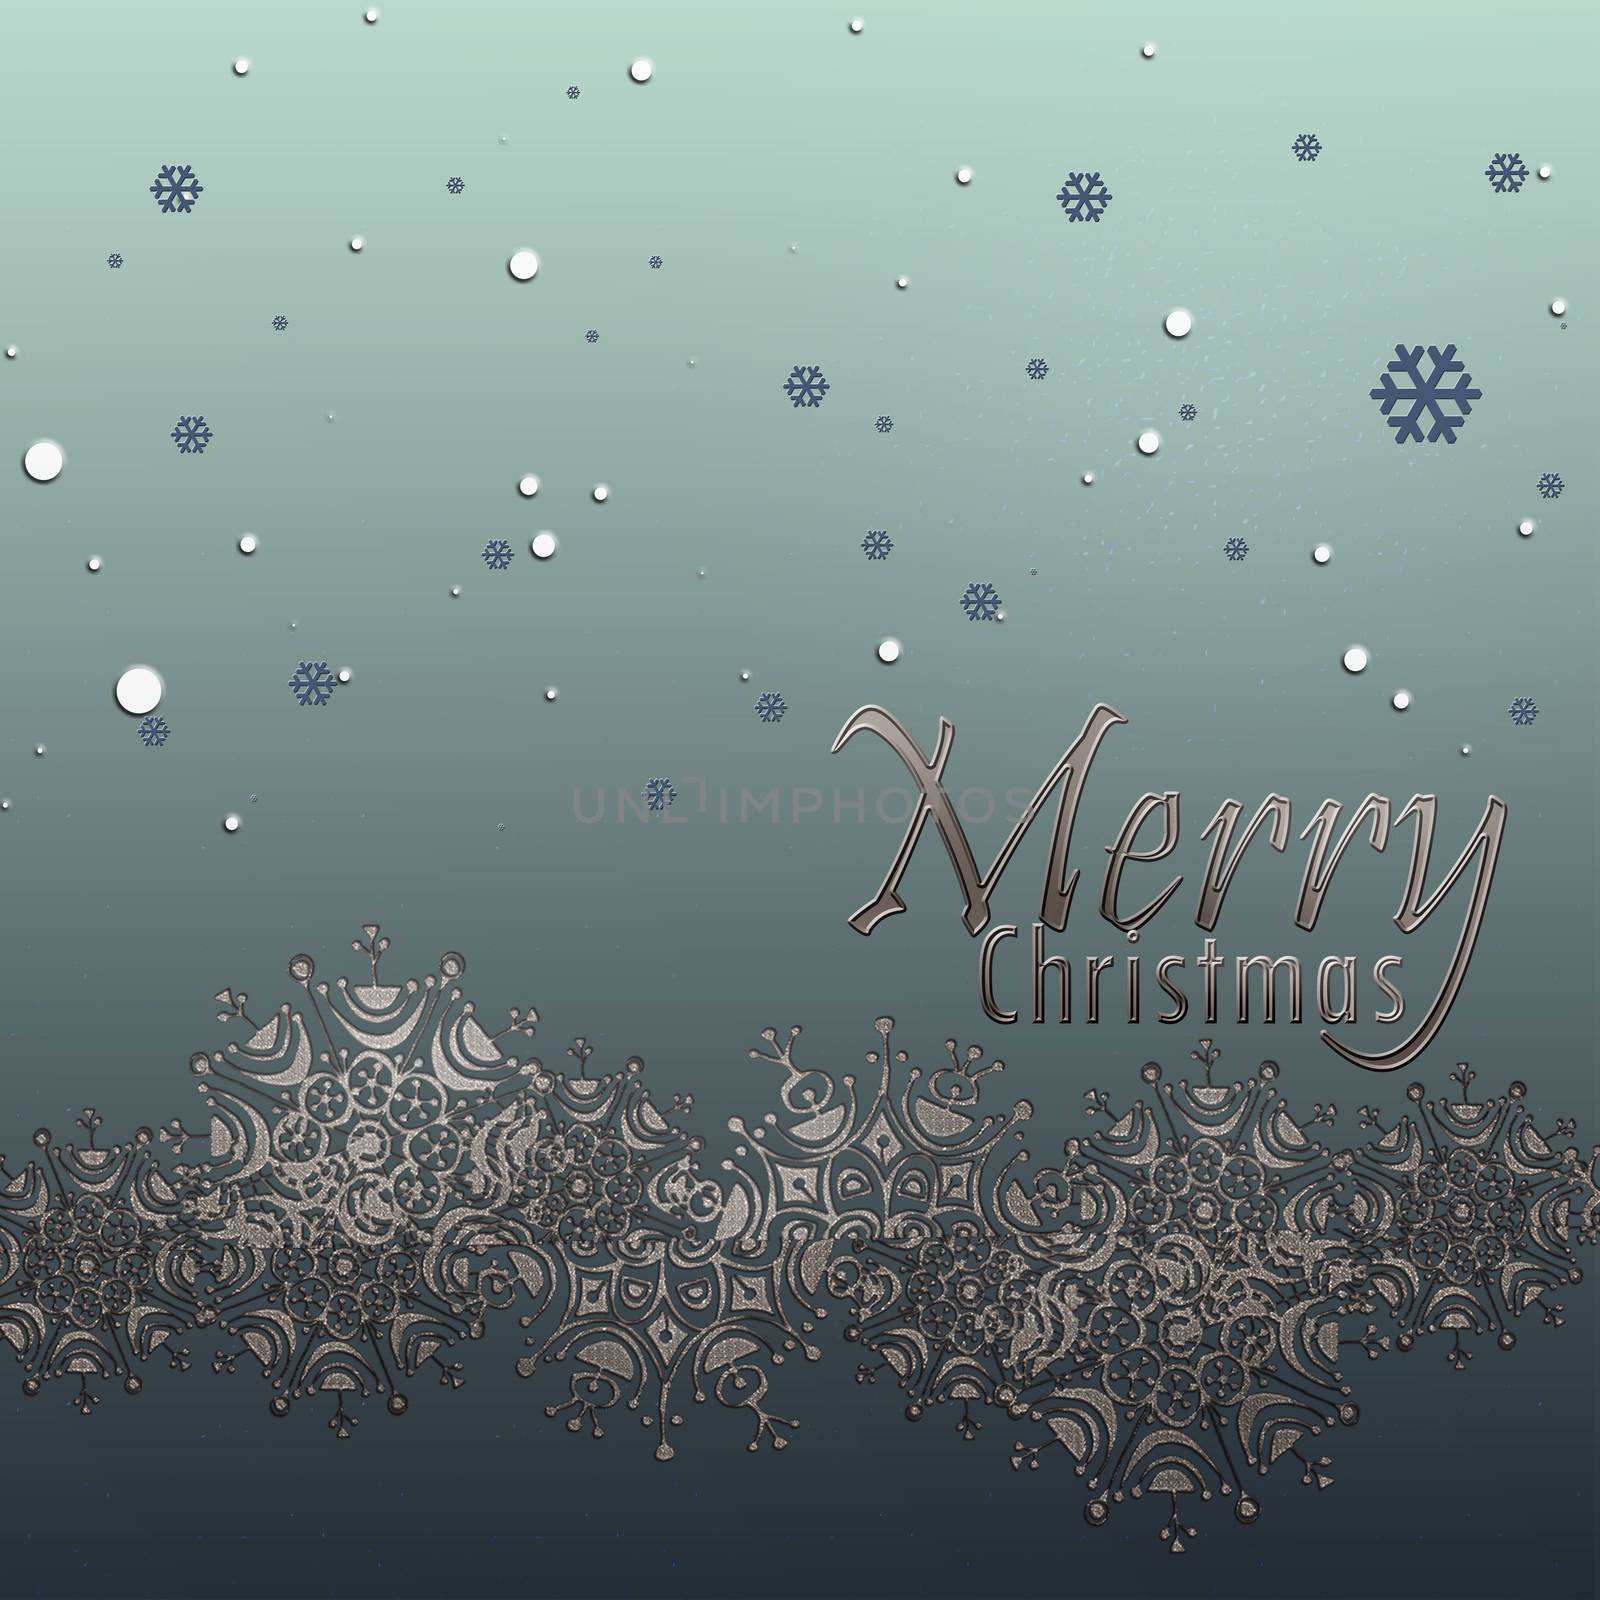 Merry Christmas card with silver snowflakes. Night sky. by NelliPolk